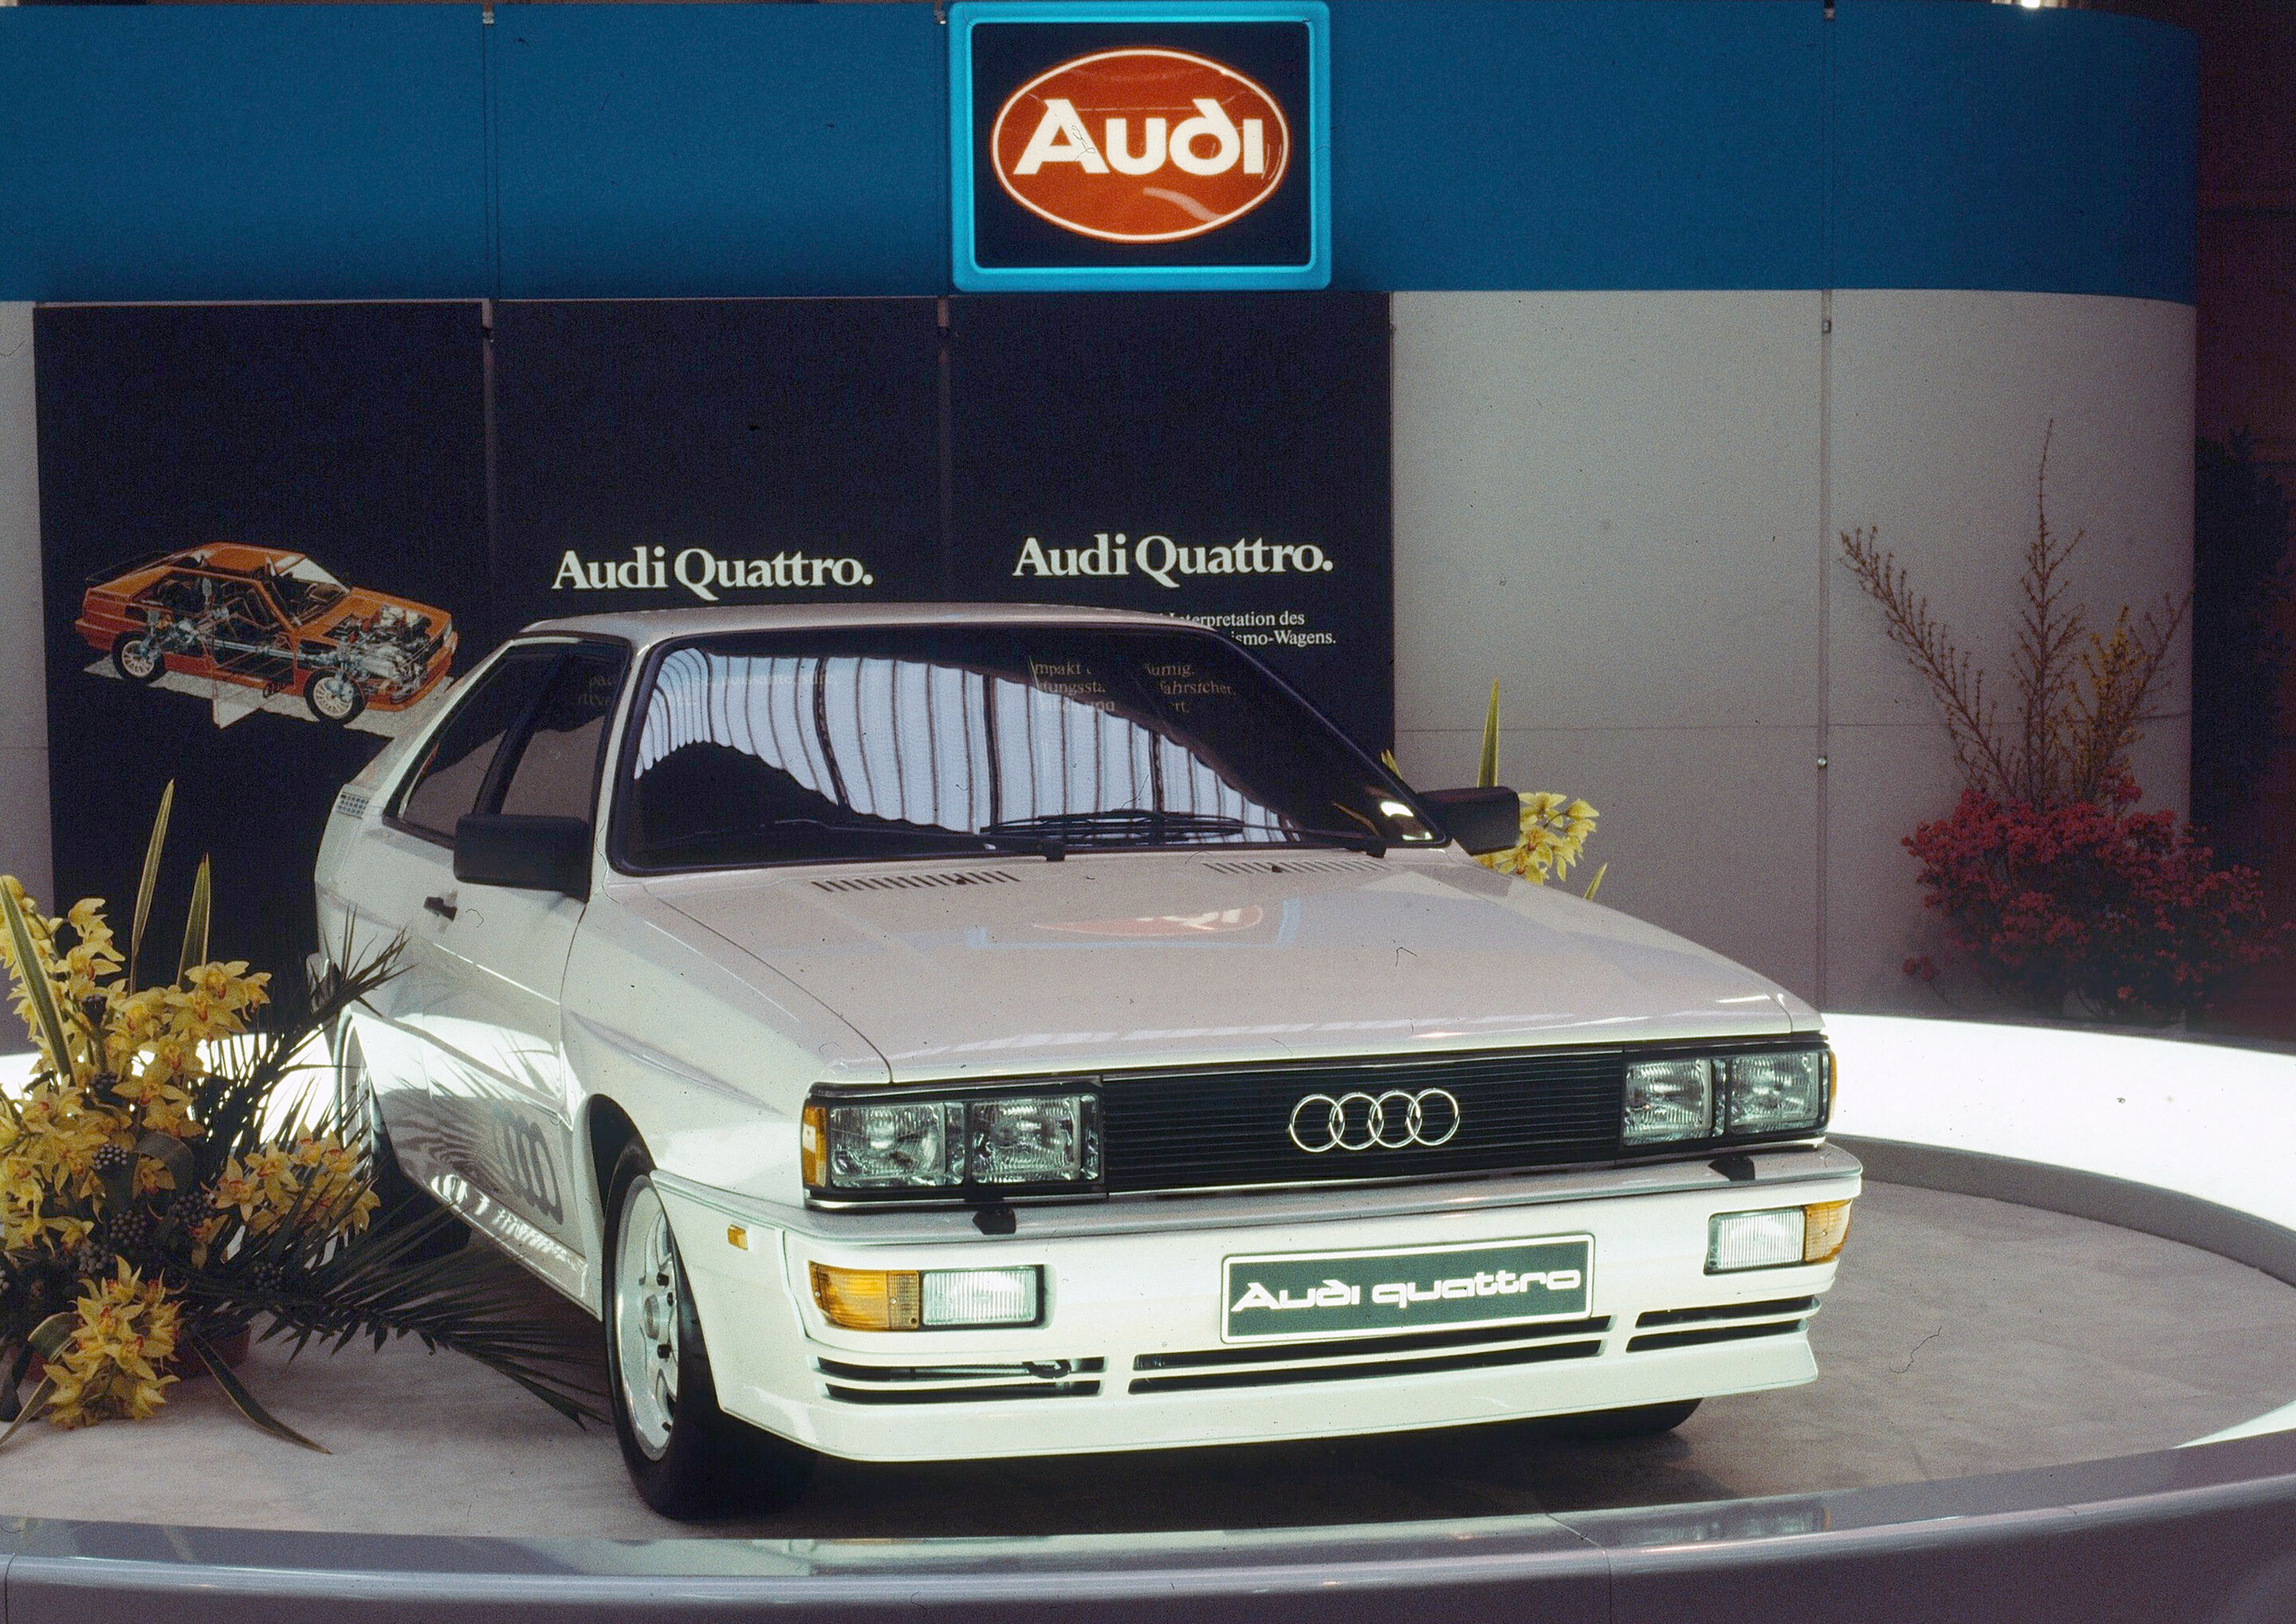 40 years, 40 figures, 40 images: fascinating facts and tales about Audi’s quattro technology